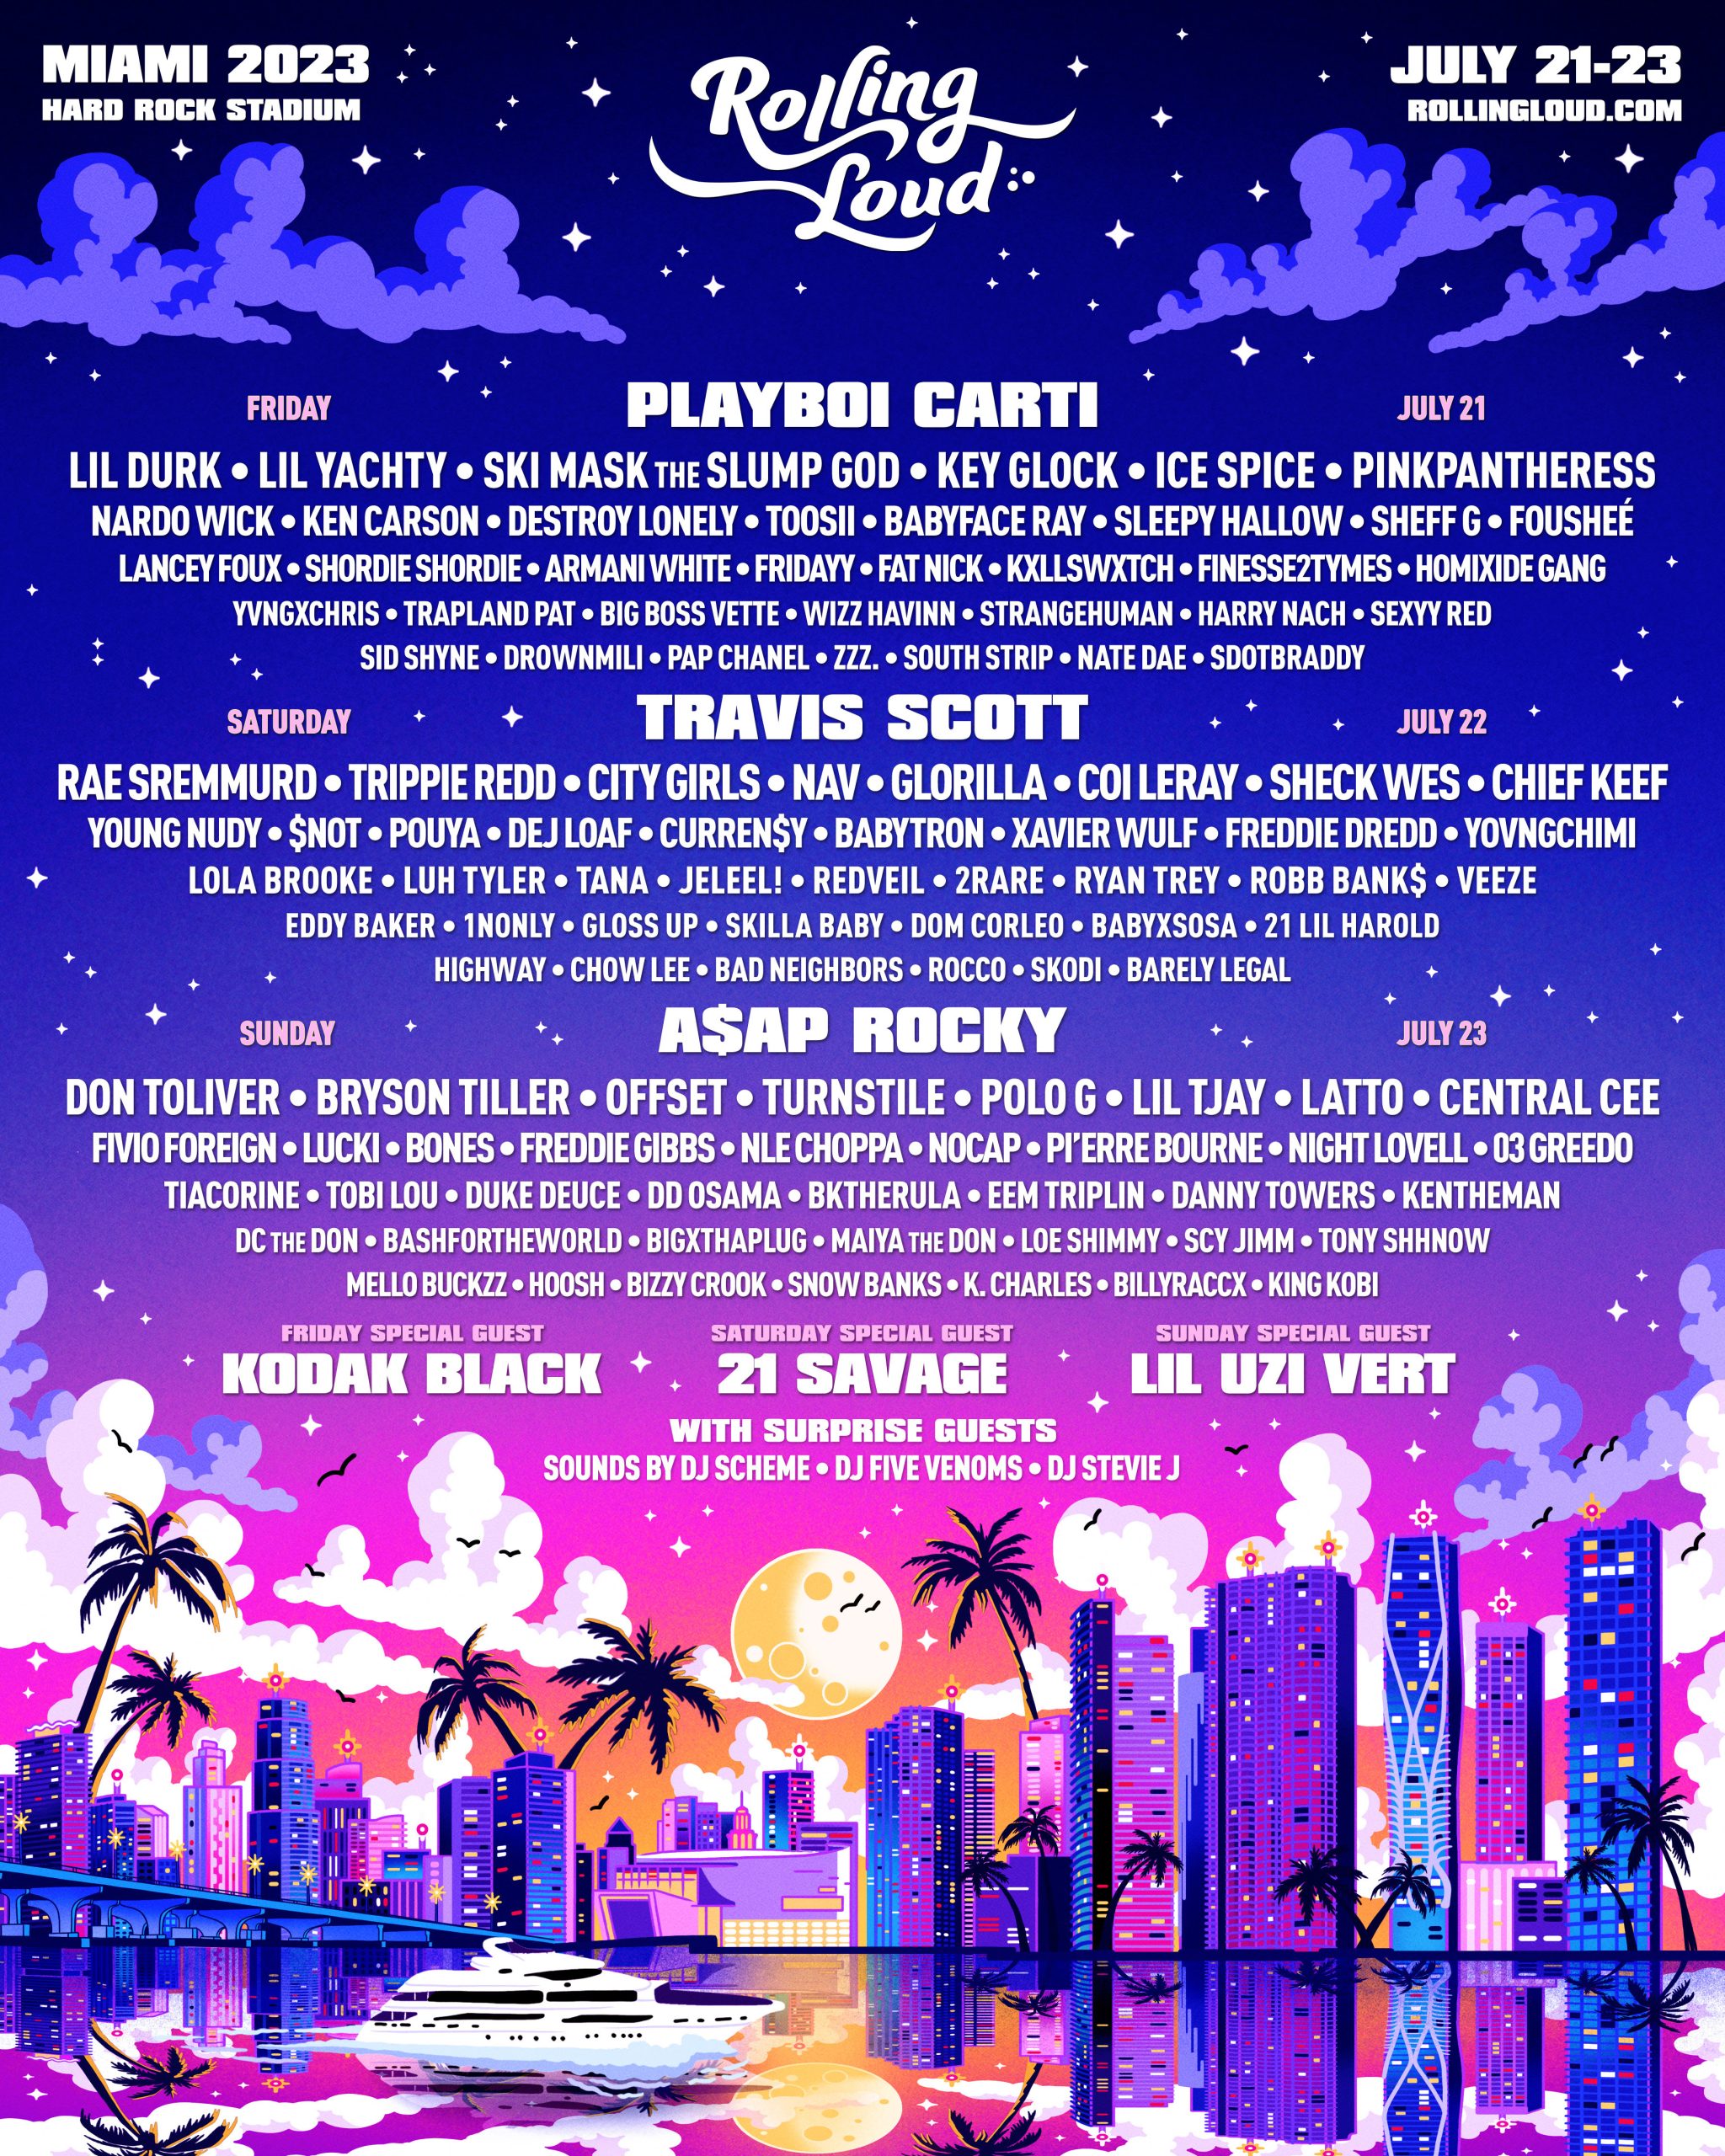 Rolling Loud Miami 2023 Returns With Powerful Lineup The Hype Magazine